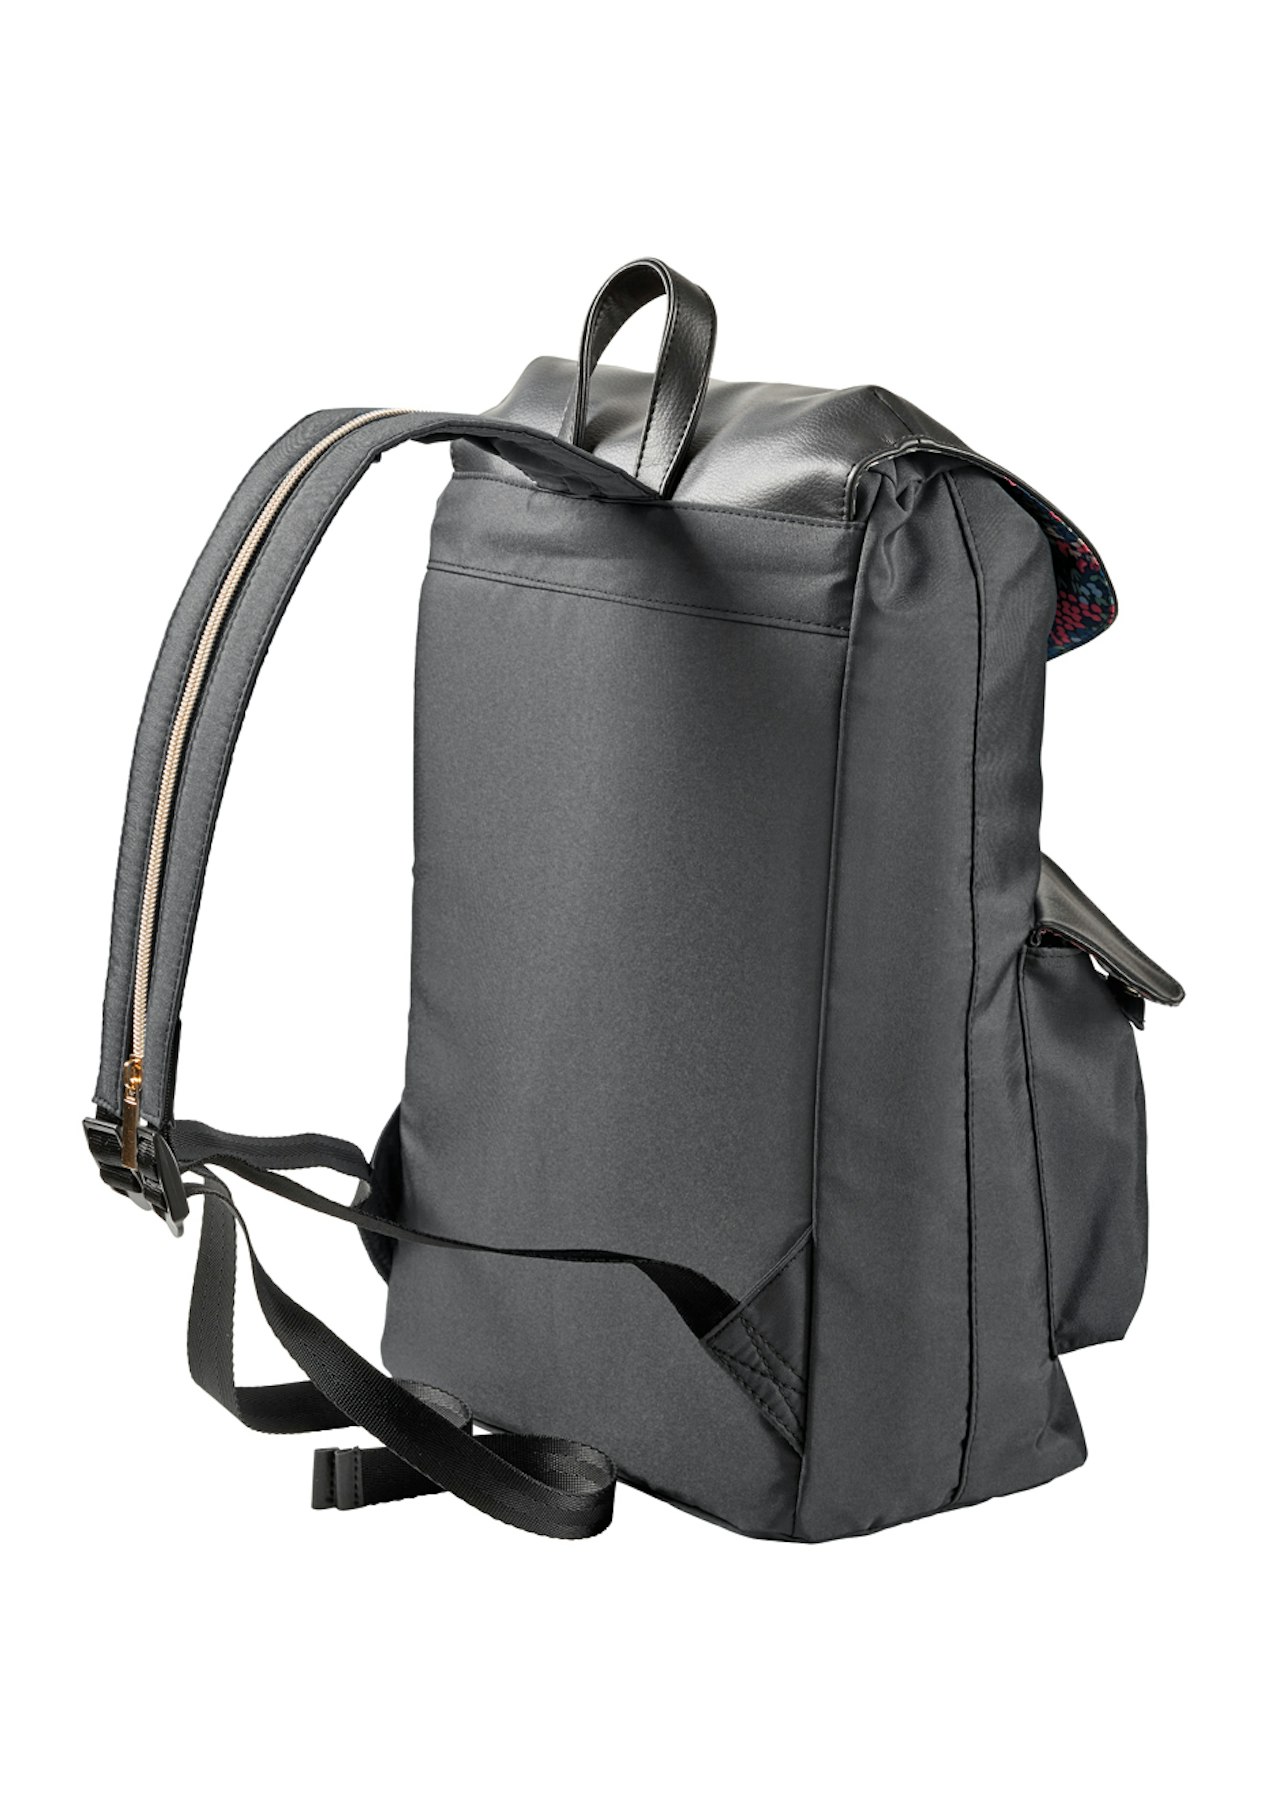 14&quot; Laptop Convertible Sling/Backpack with Tablet Pocket - Wenger Since 1893: Back to Work ...